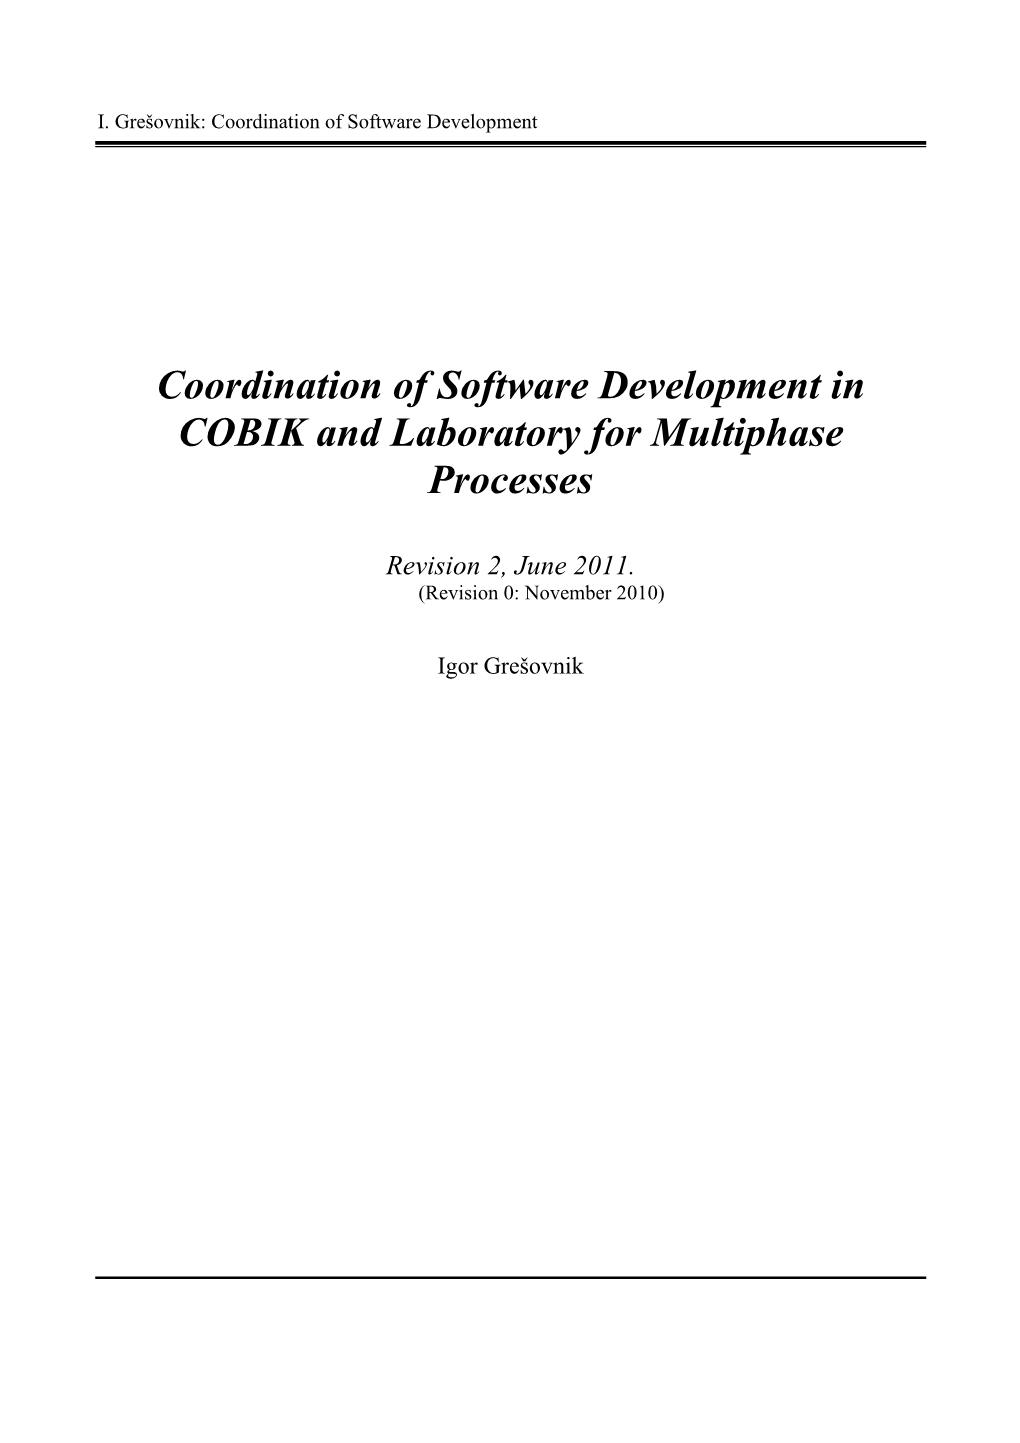 Coordination of Software Development in COBIK and Laboratory for Multiphase Processes